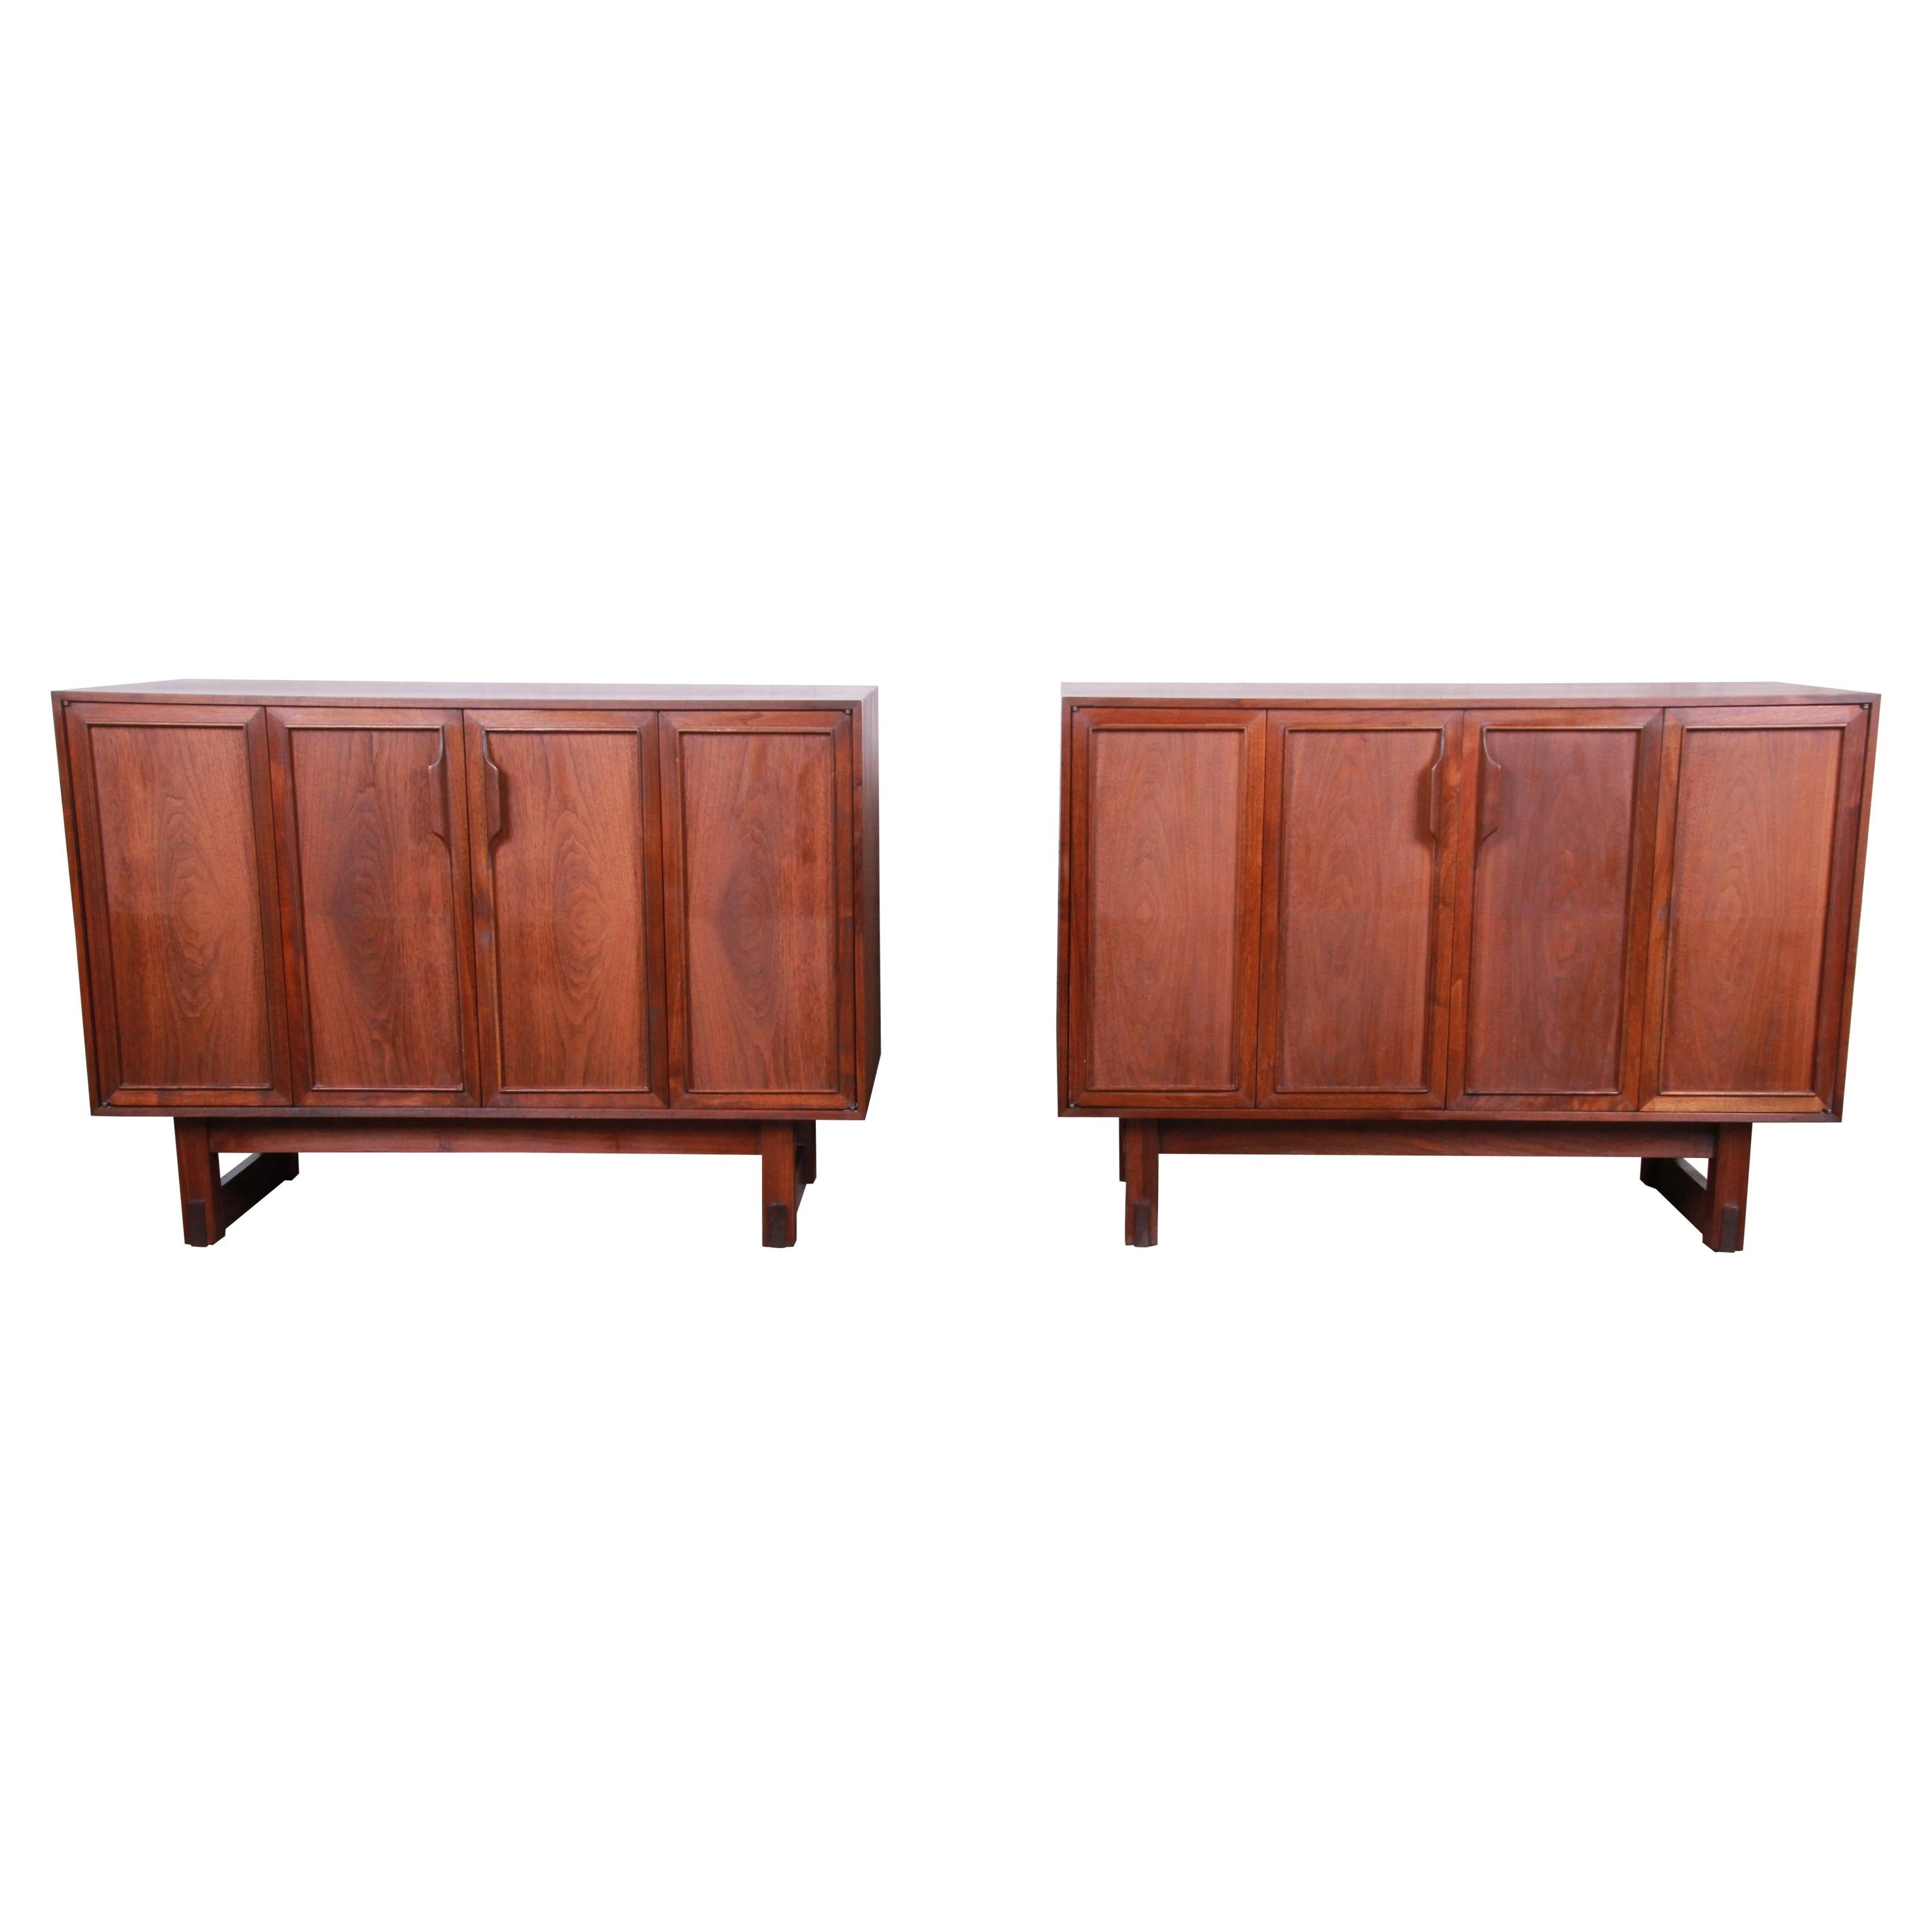 Lawrence Peabody Mid-Century Modern Walnut Cabinets or Large Bedside Chests